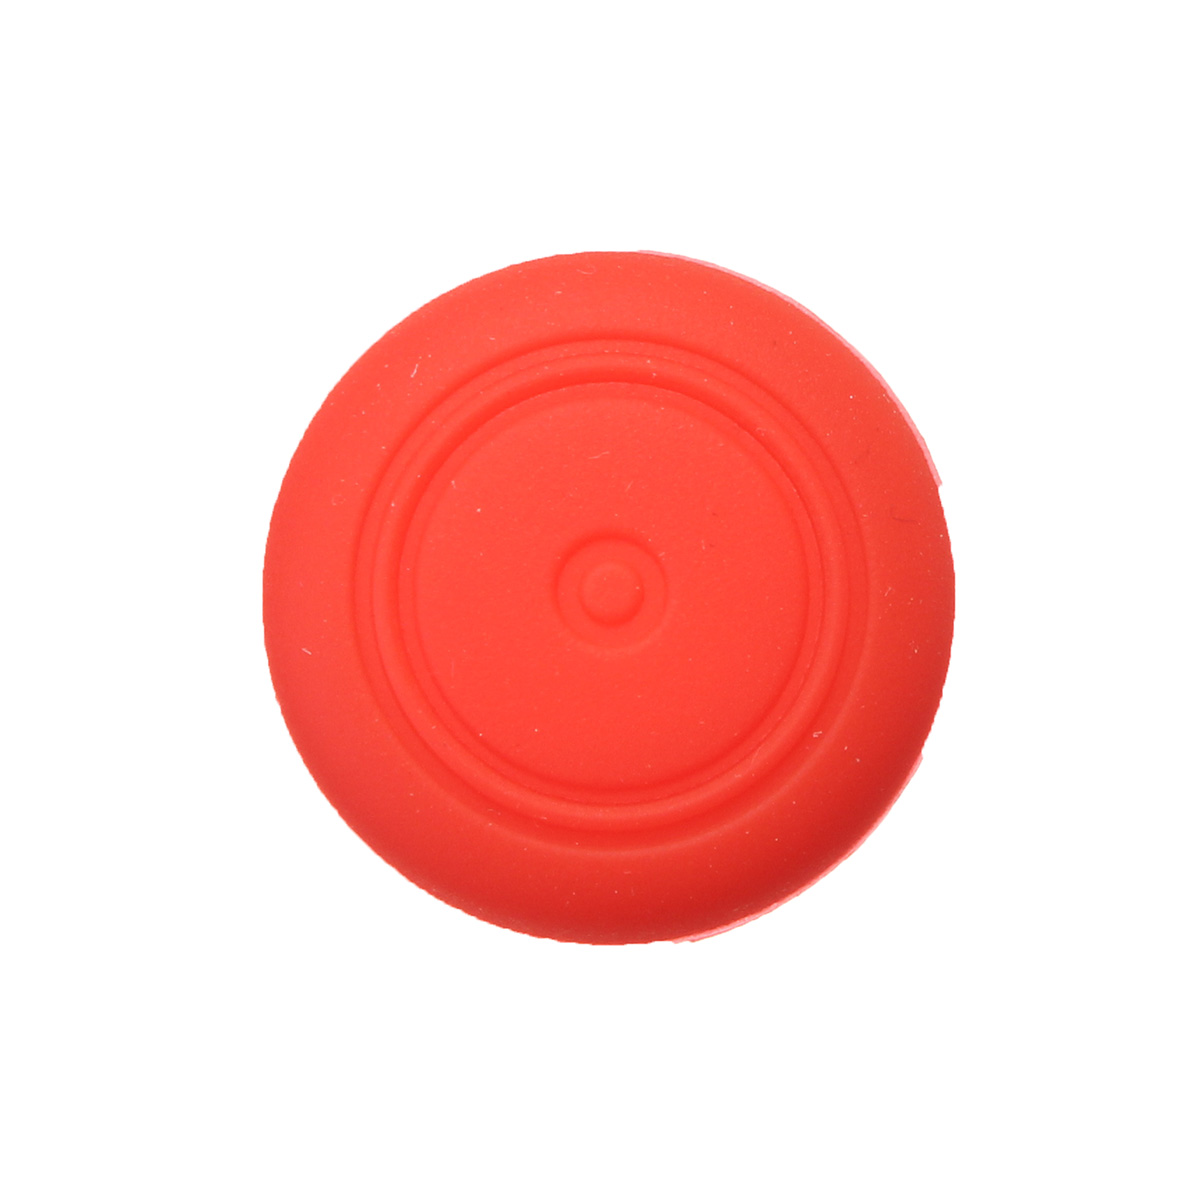 Silicone-Replacement-Thumb-Grip-Stick-Cap-Cover-Skin-For-Nintendo-Switch-Joy-Con-1162173